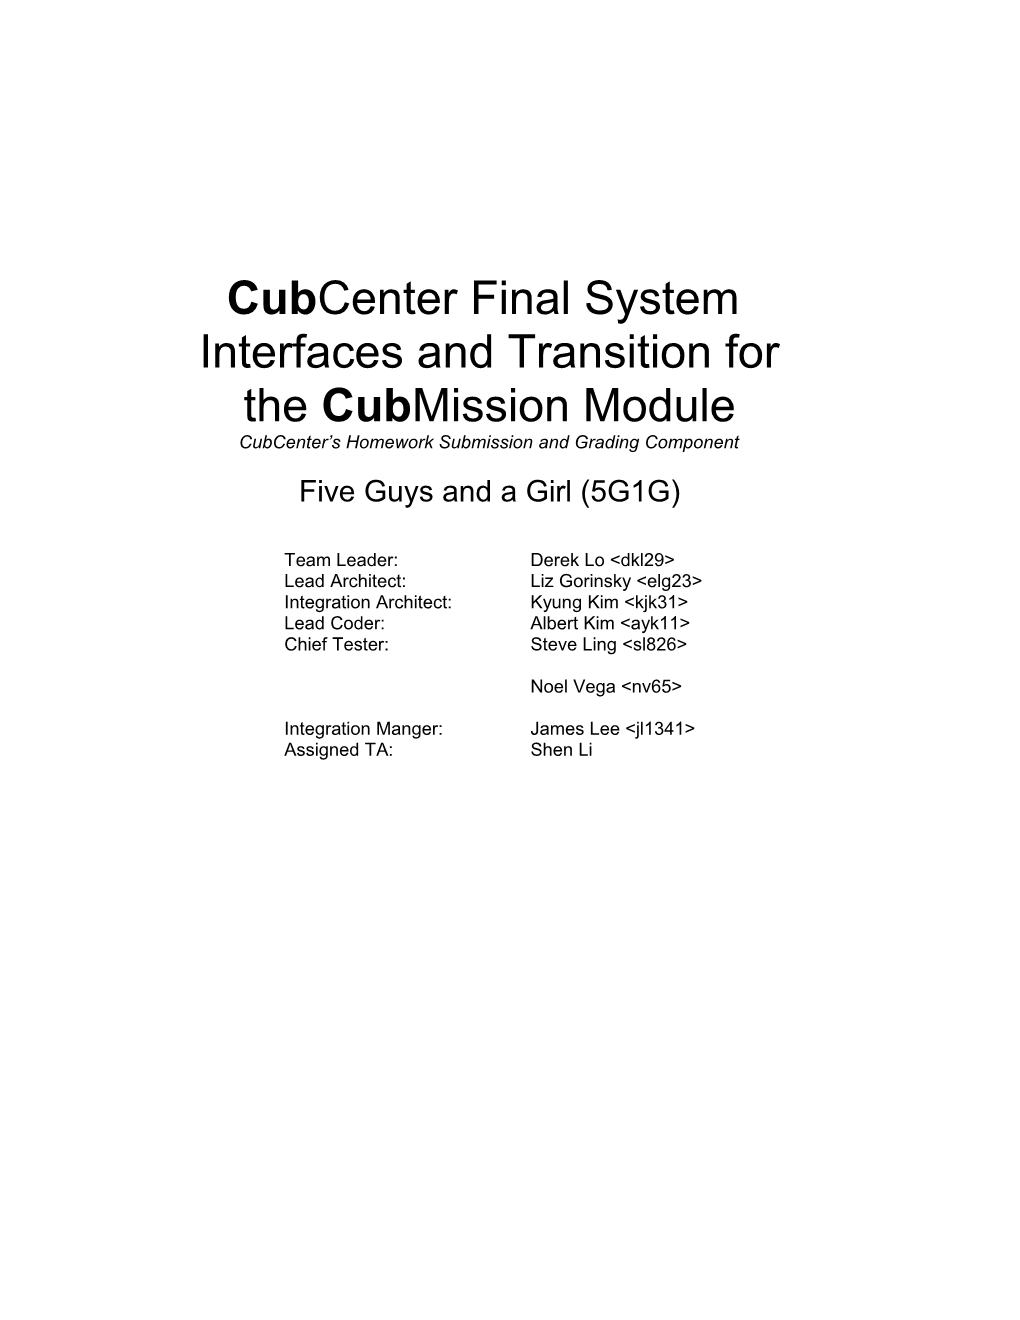 Five Guys and a Girl Final System Interfaces and Transition Document